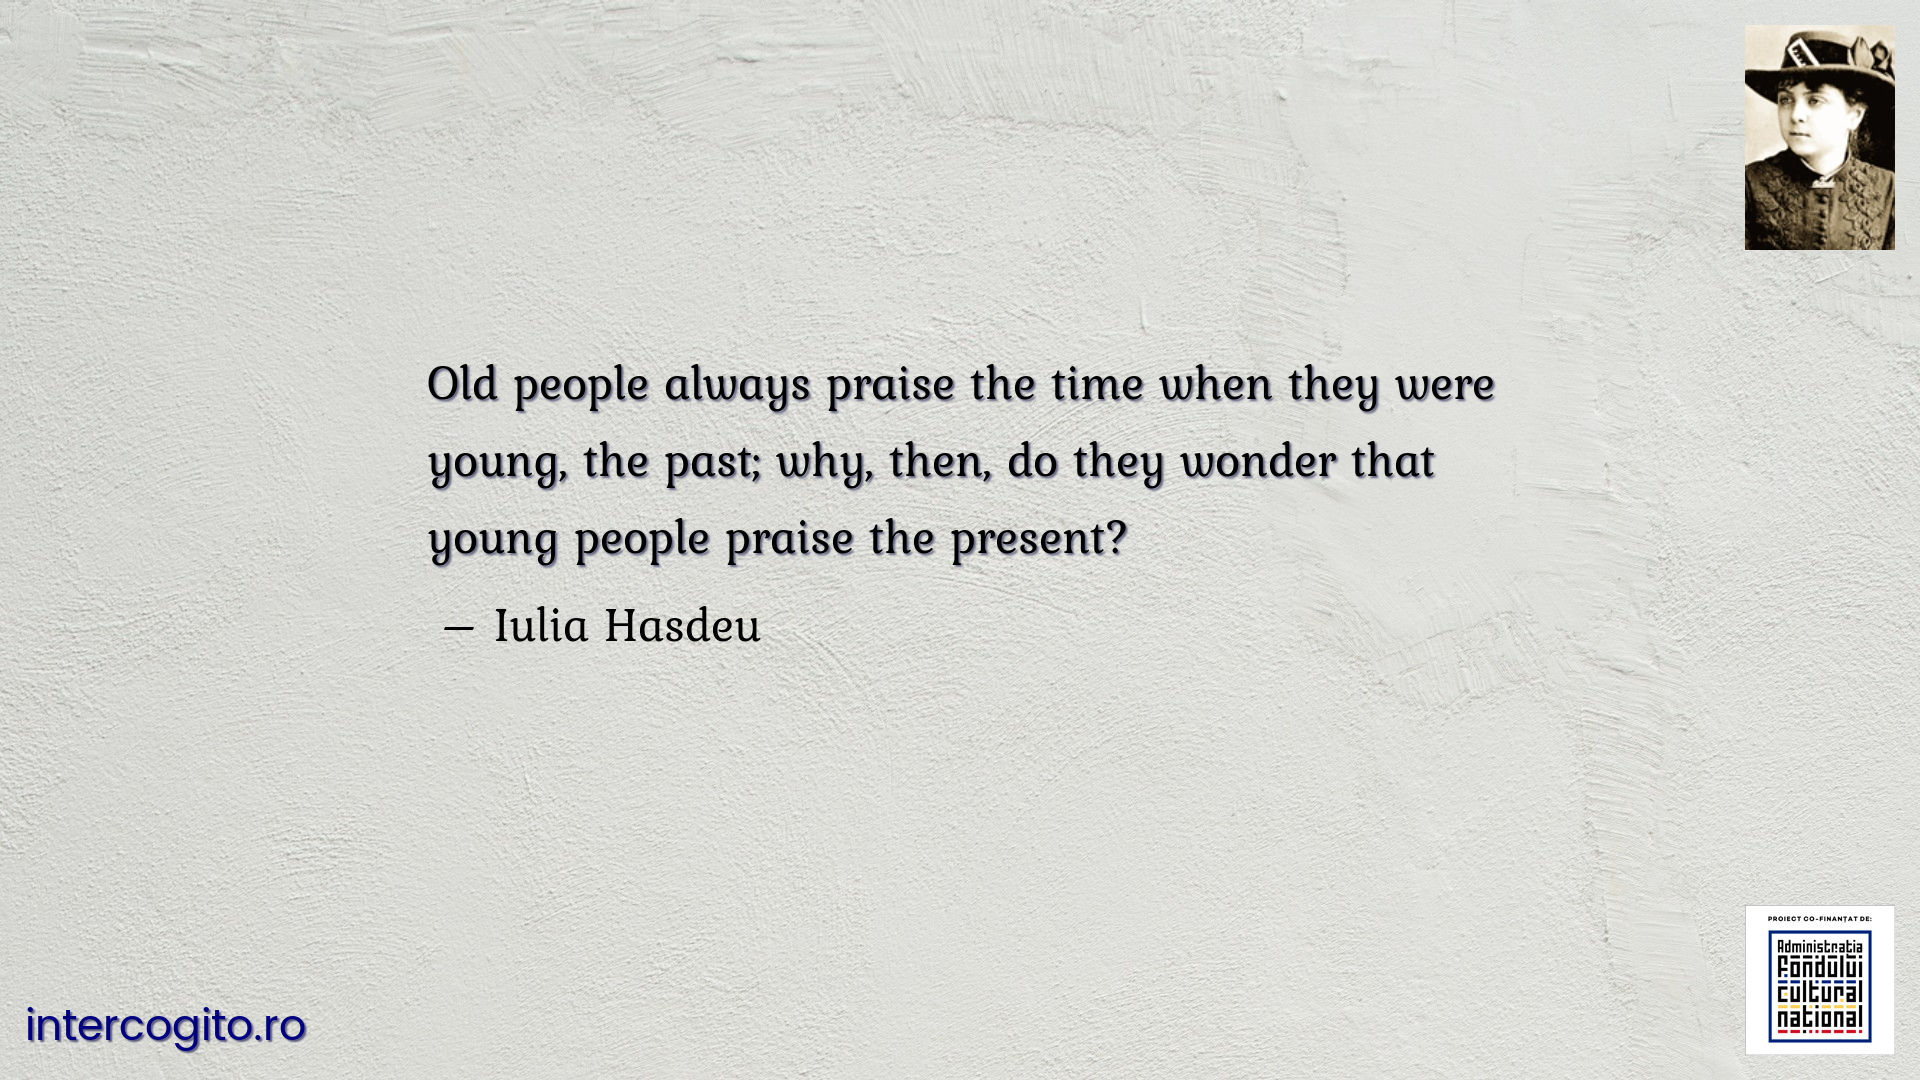 Old people always praise the time when they were young, the past; why, then, do they wonder that young people praise the present?